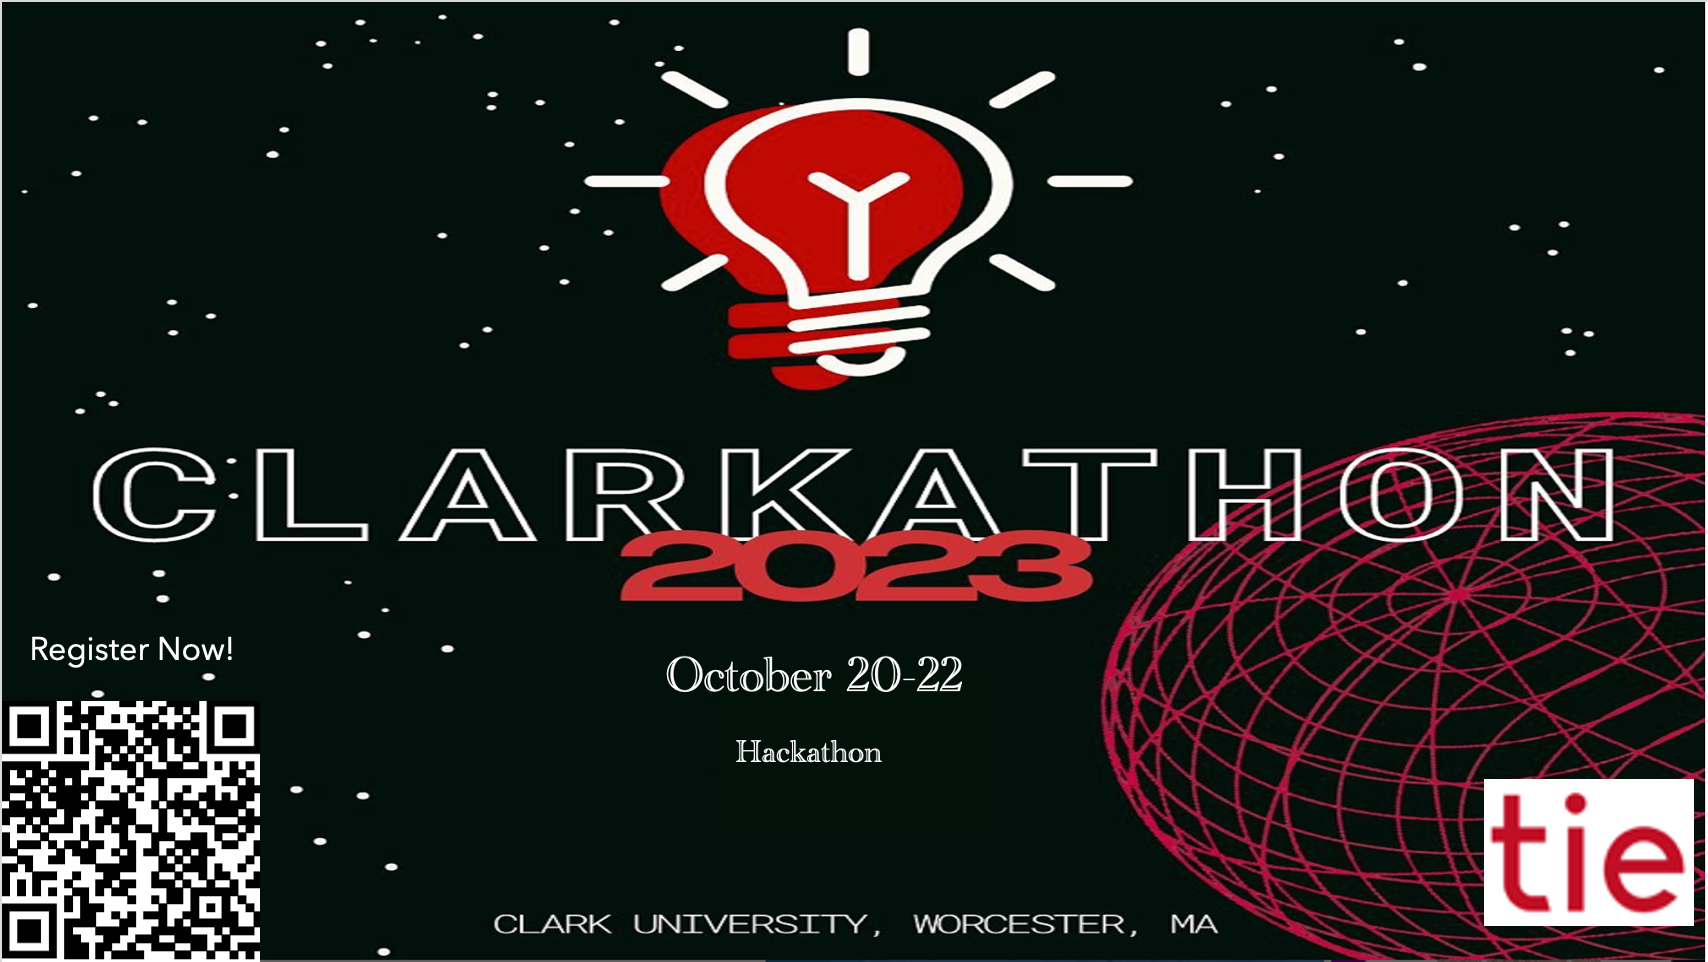 Clarkathon - A hackathon being hosted by ClarkTIE from Oct 20 to Oct 22.